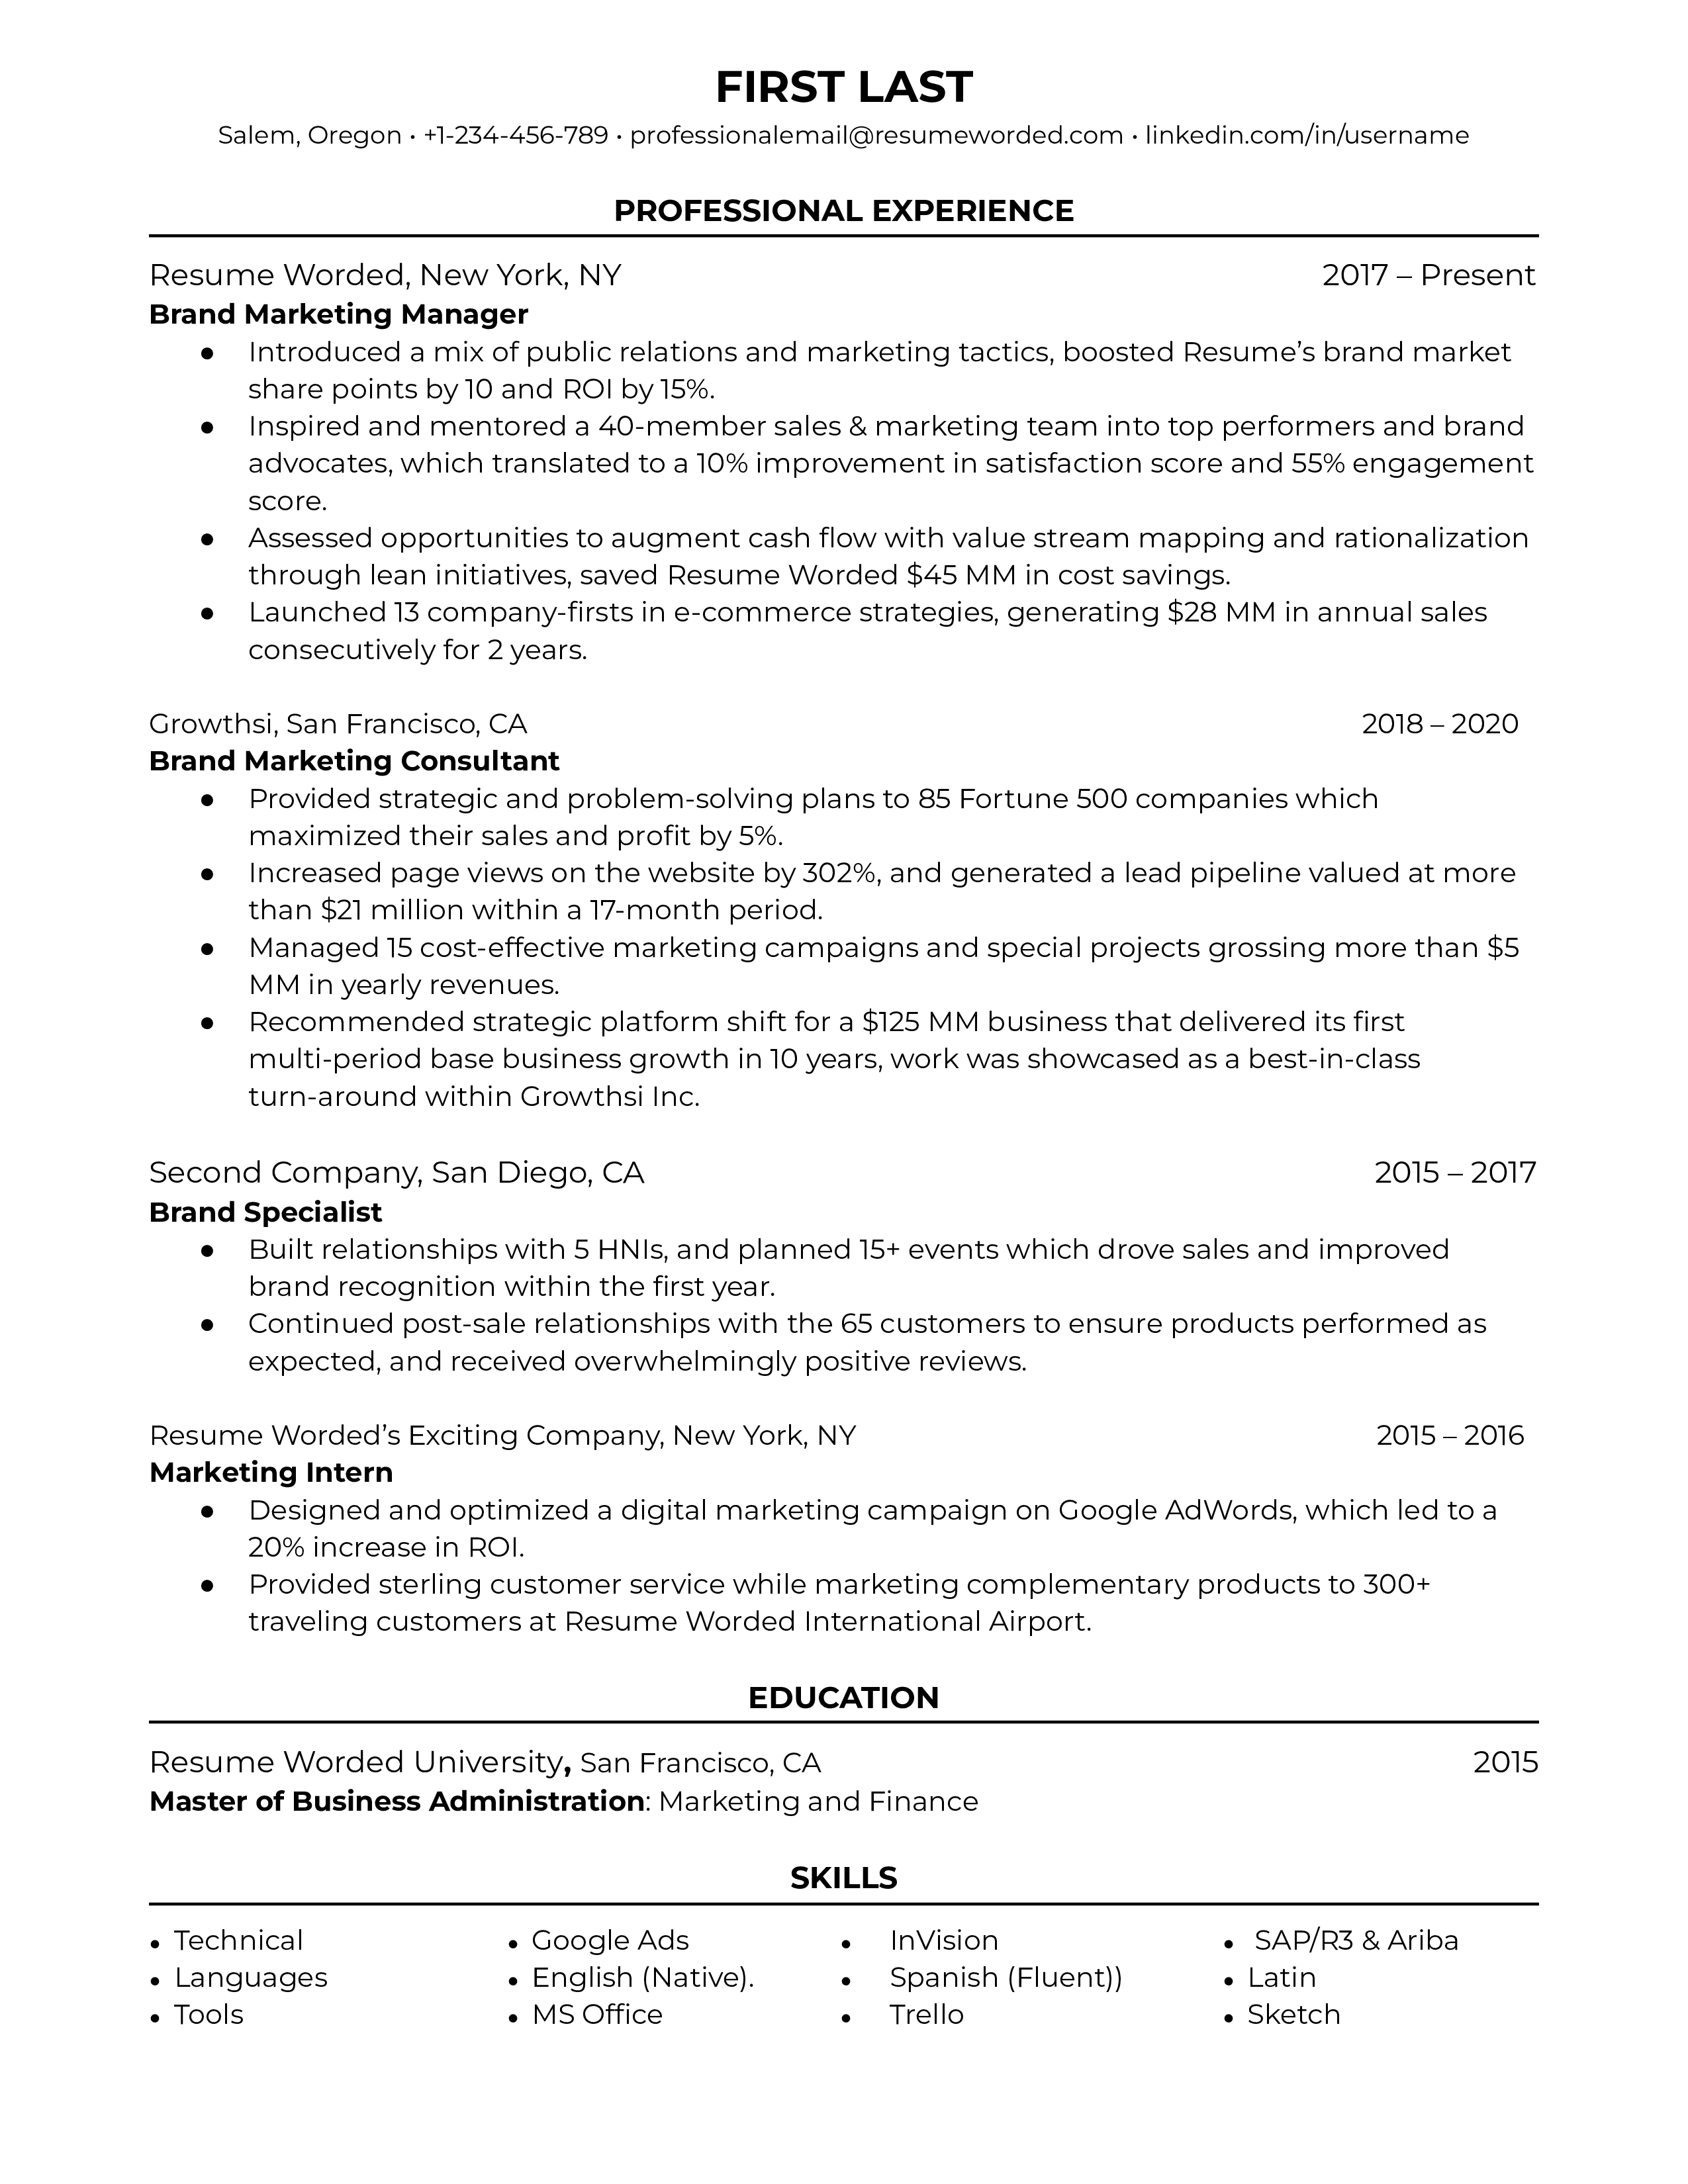 A brand marketing manager resume that focuses on marketing relationship management and growth. 